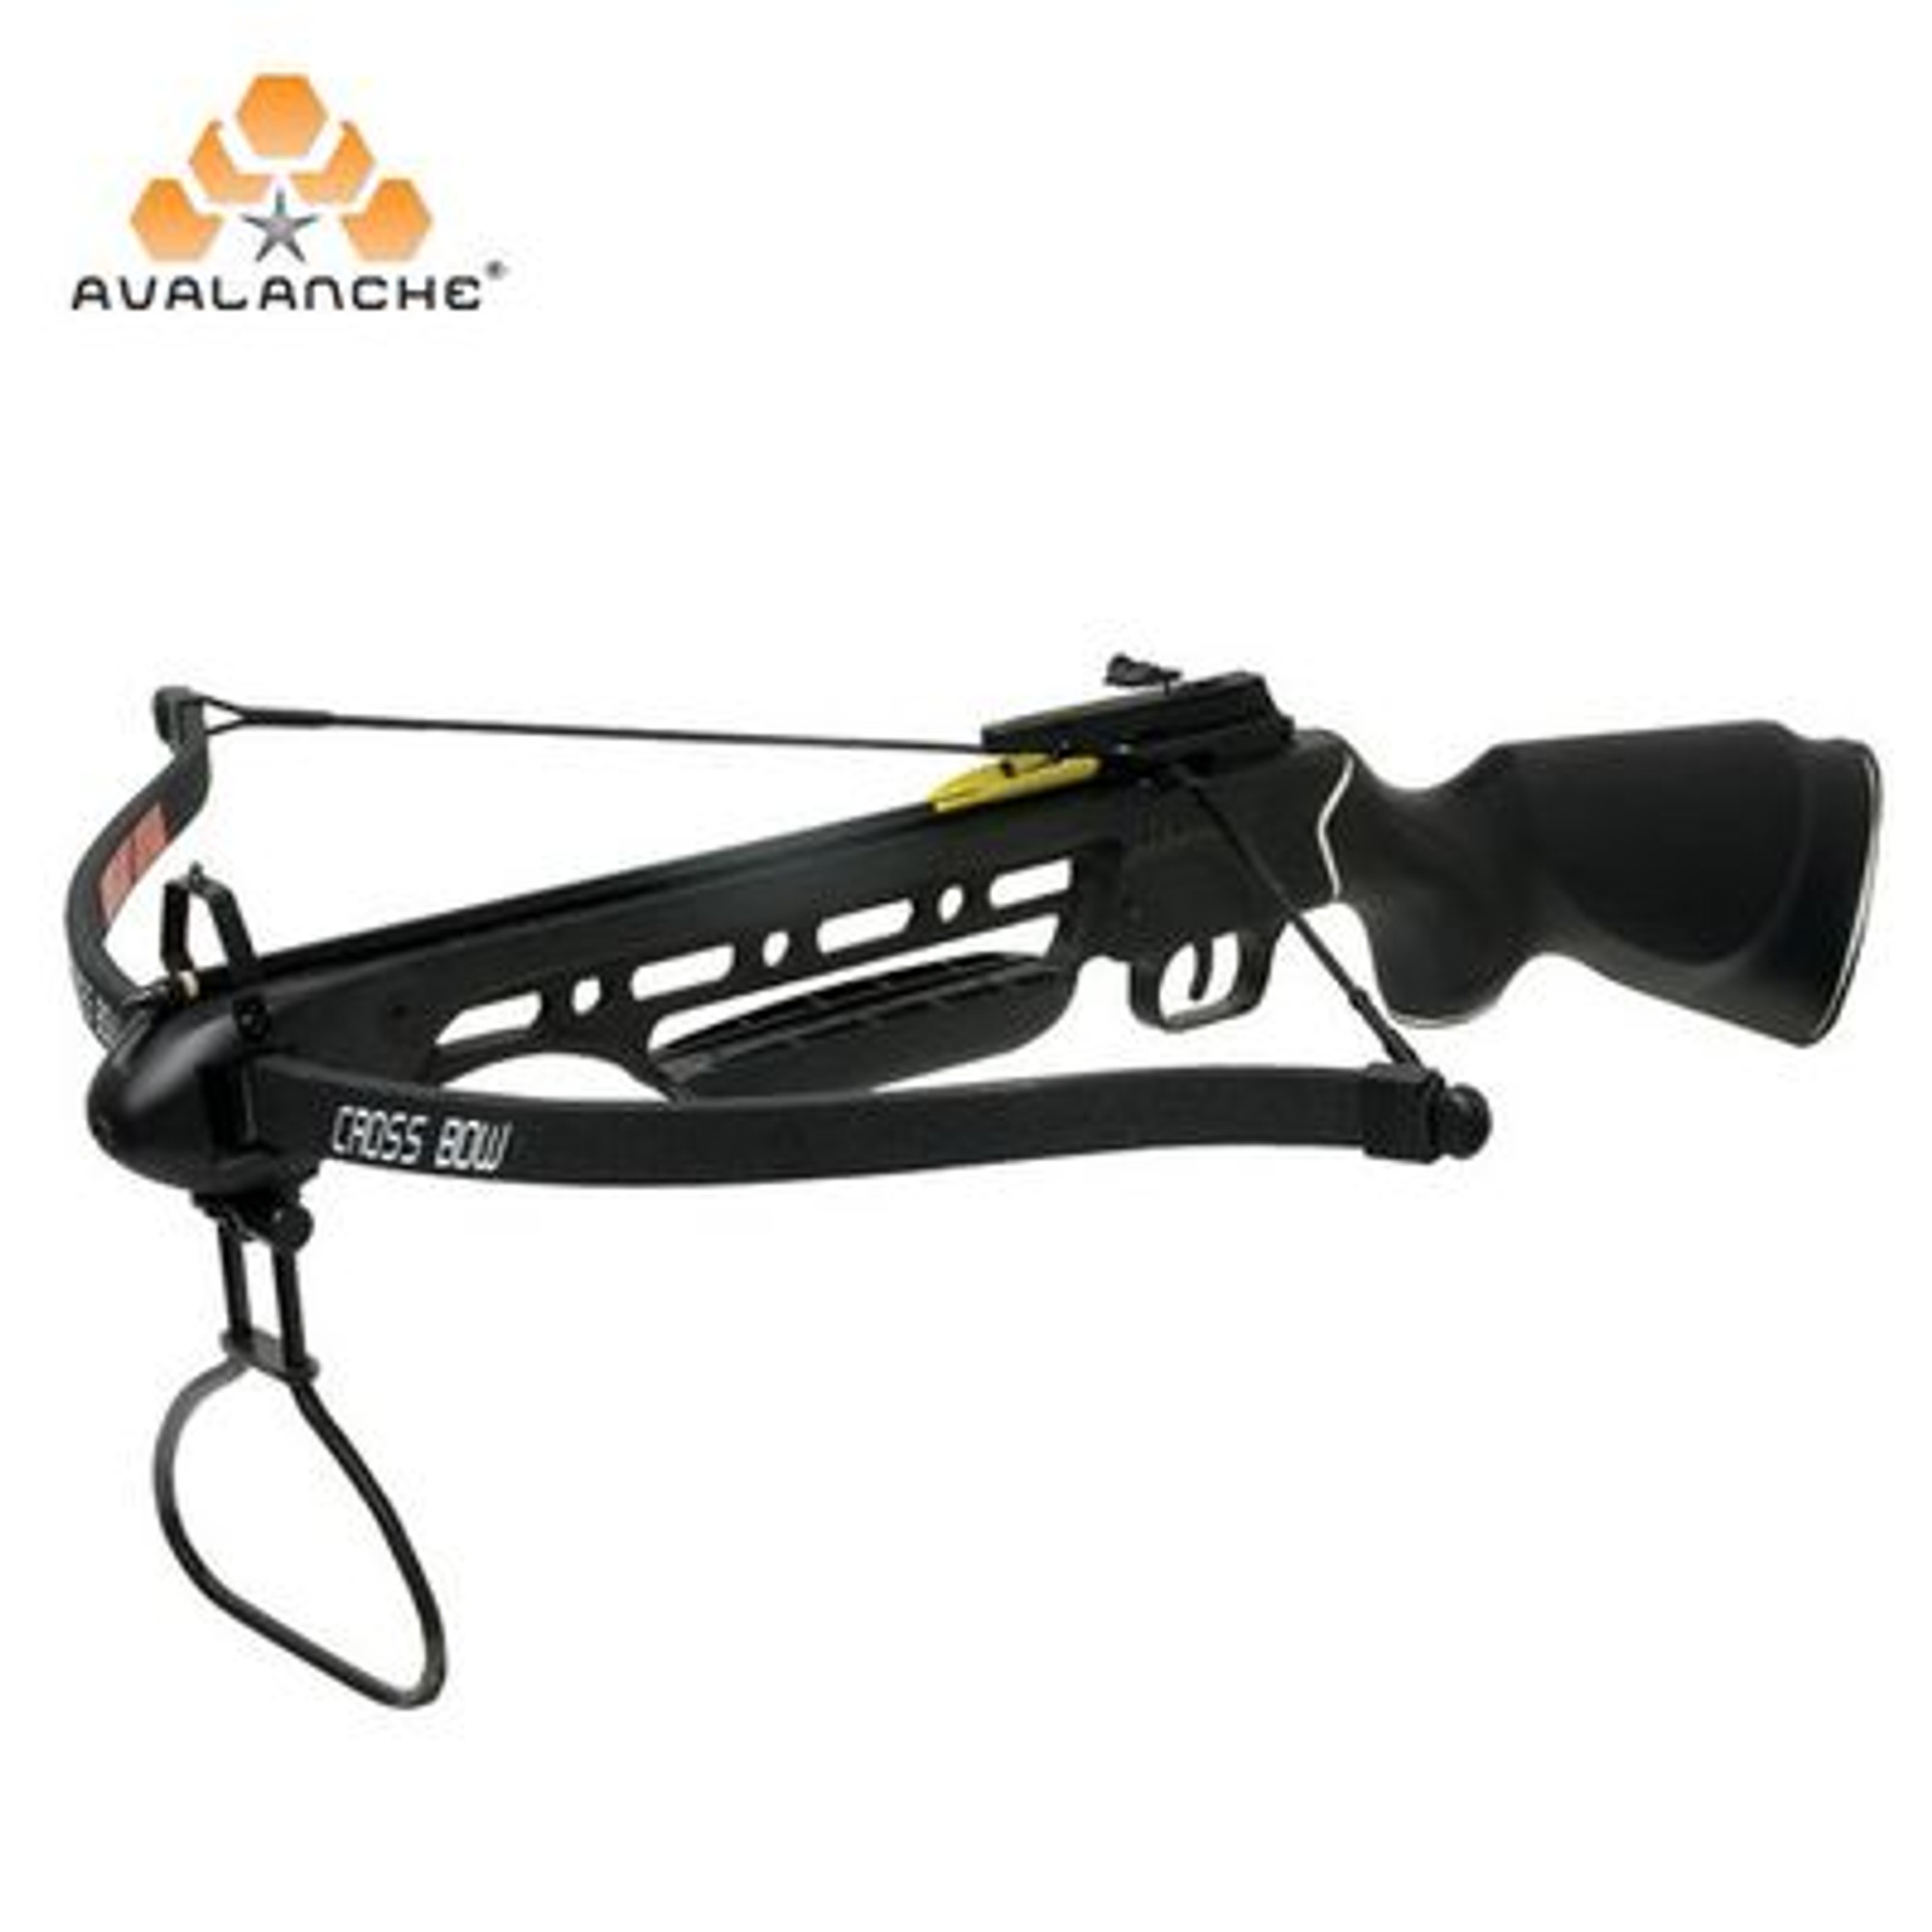 Avalanche Composite Stock Hunting Crossbow 150 lb.